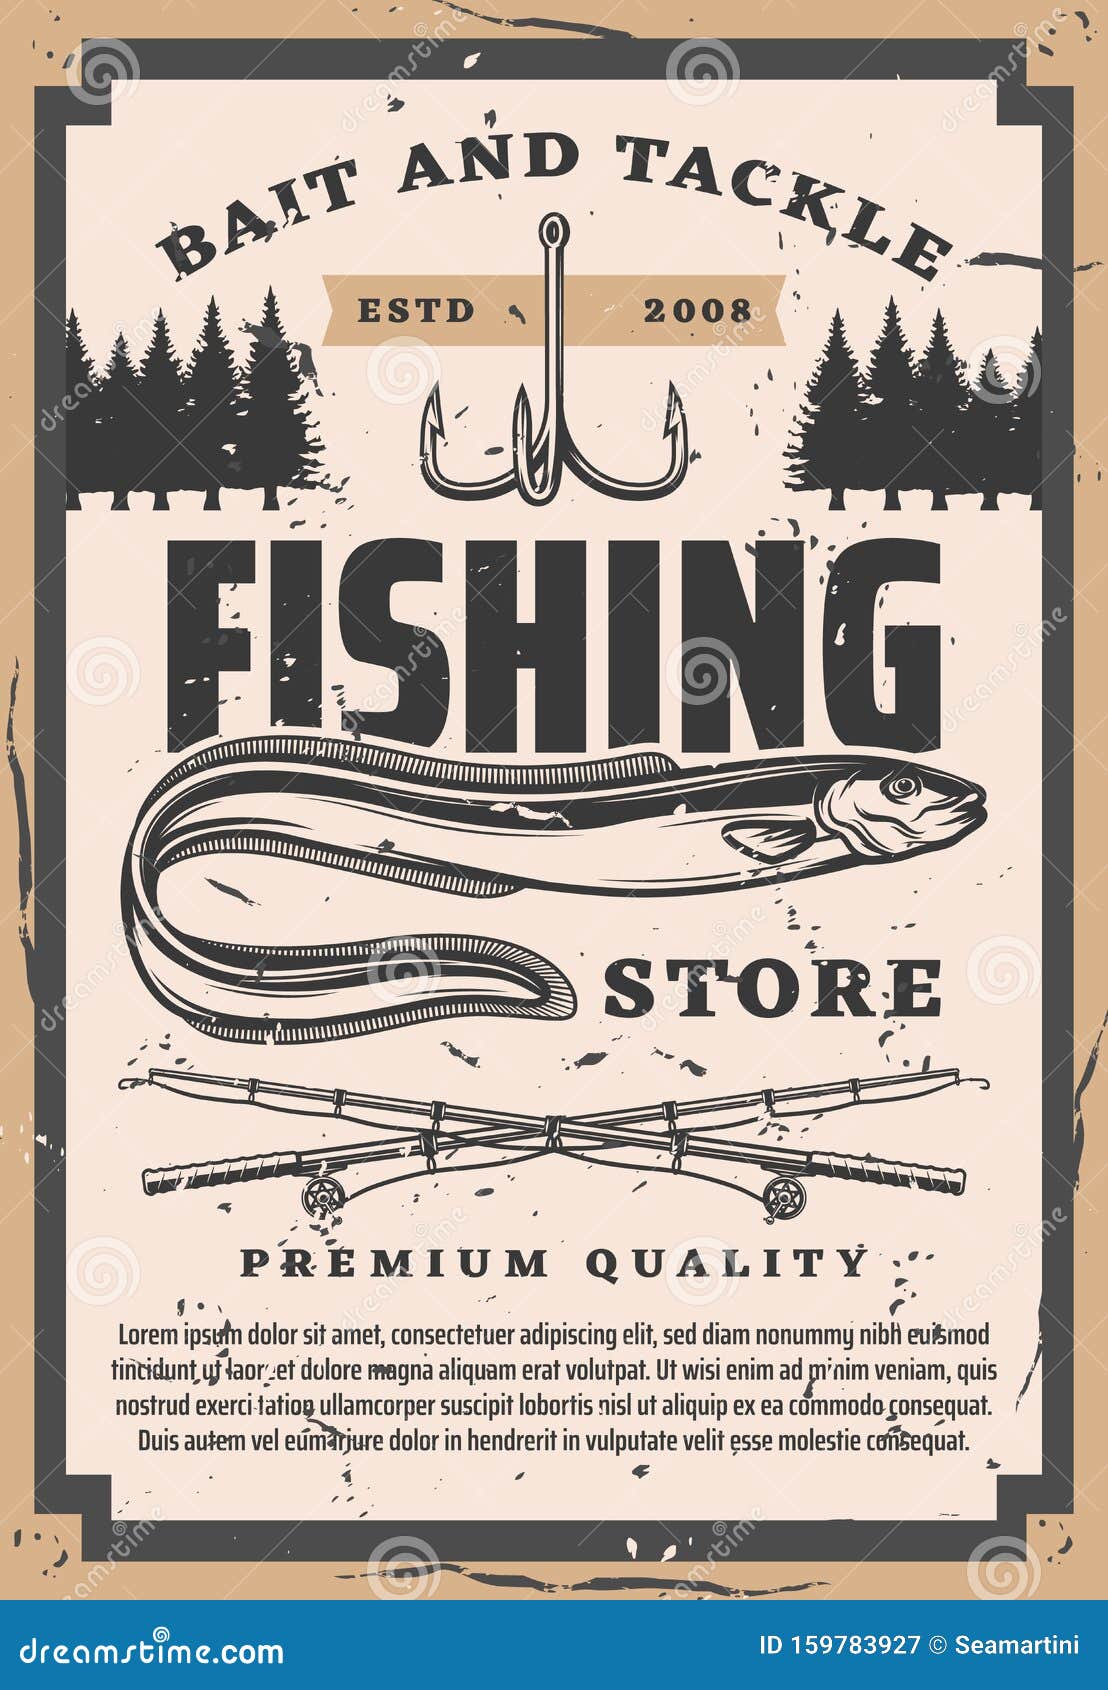 https://thumbs.dreamstime.com/z/eel-fishing-vector-fisher-big-catch-bait-tackles-store-vintage-poster-sea-ocean-fish-lures-spinning-rods-hooks-club-tackle-159783927.jpg